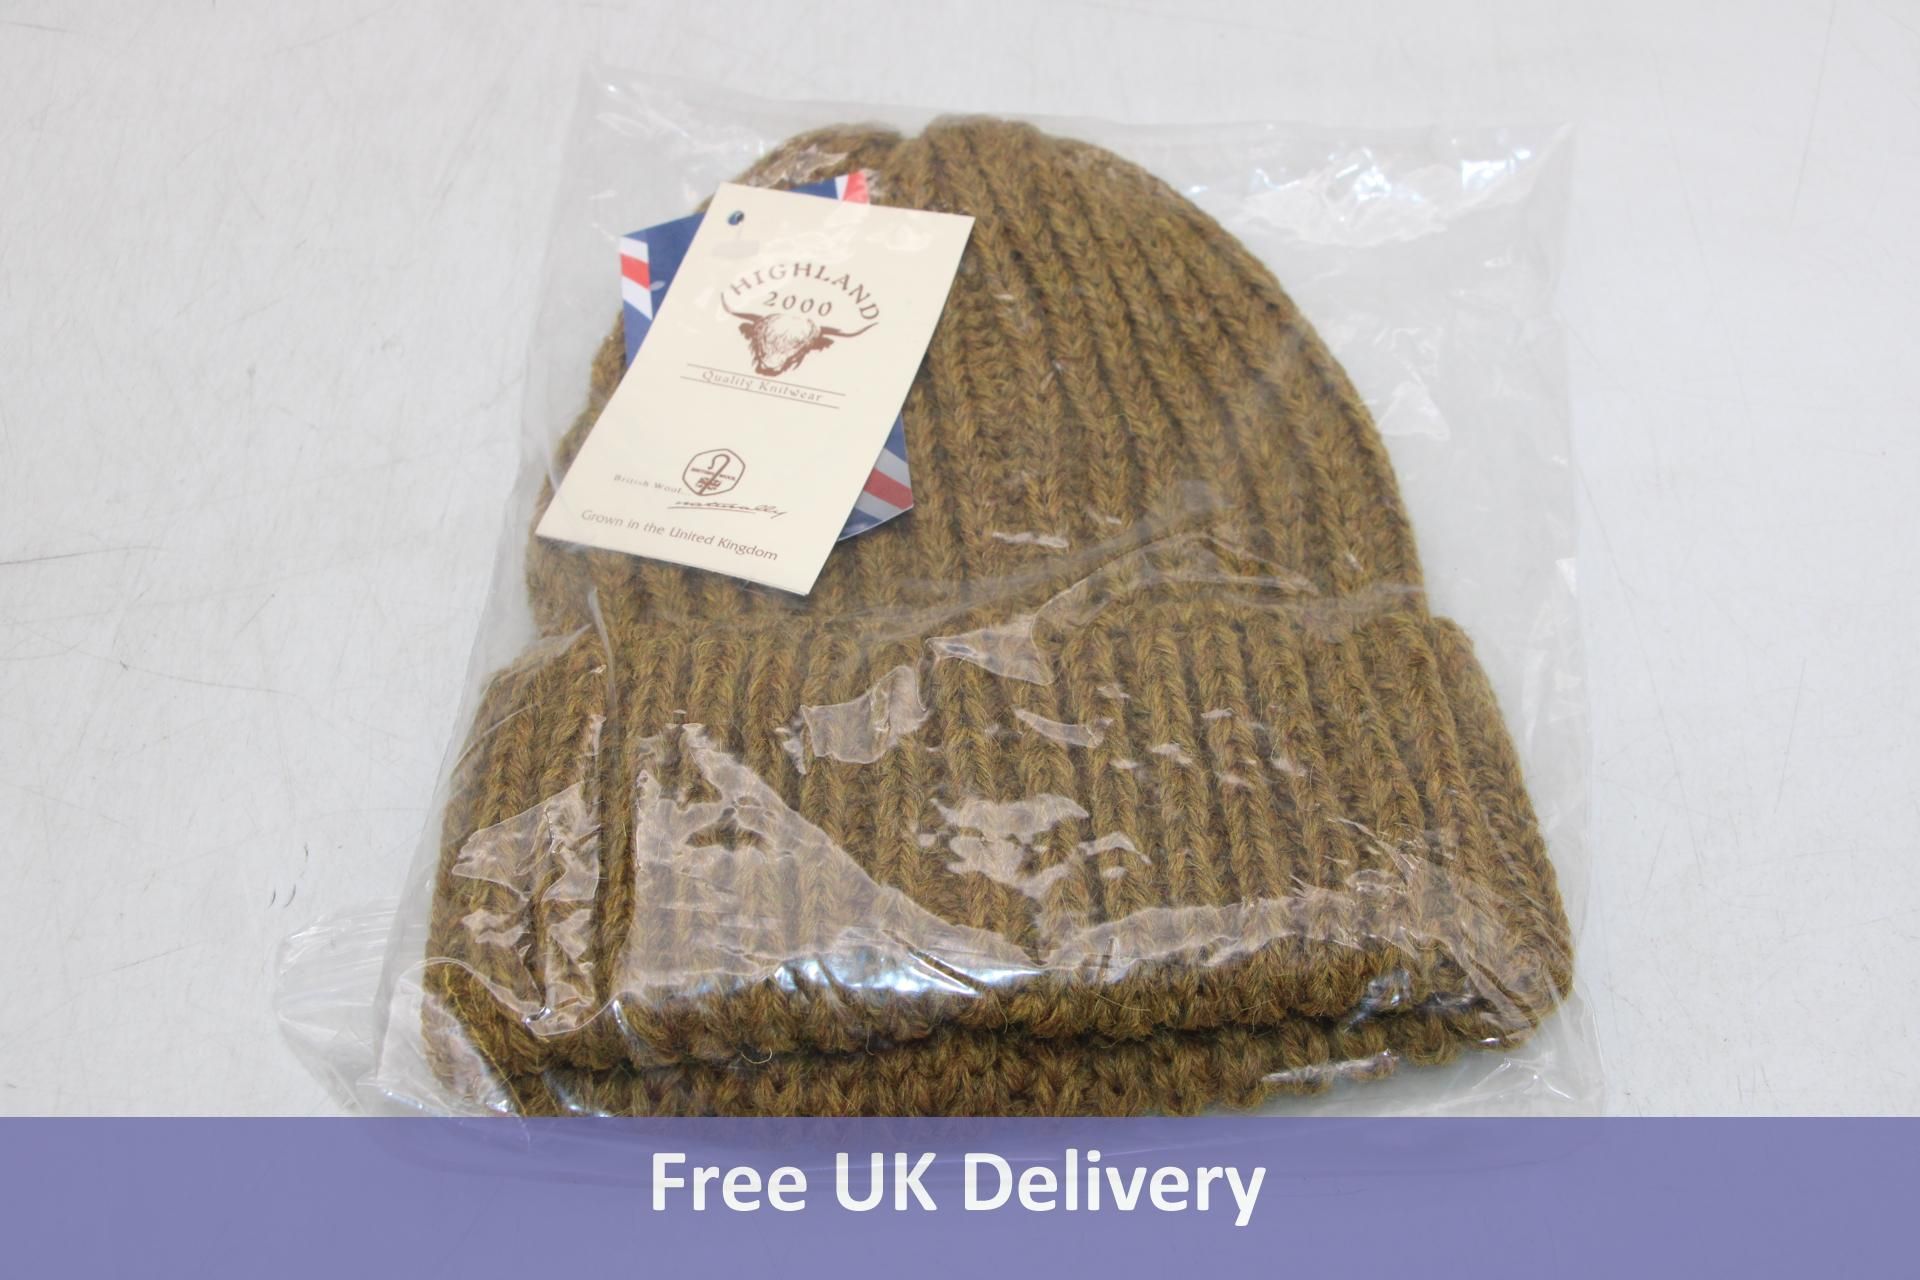 Five Highland 2000 Cuffed Cable Knit English Wool Beanie Hat, Toffee